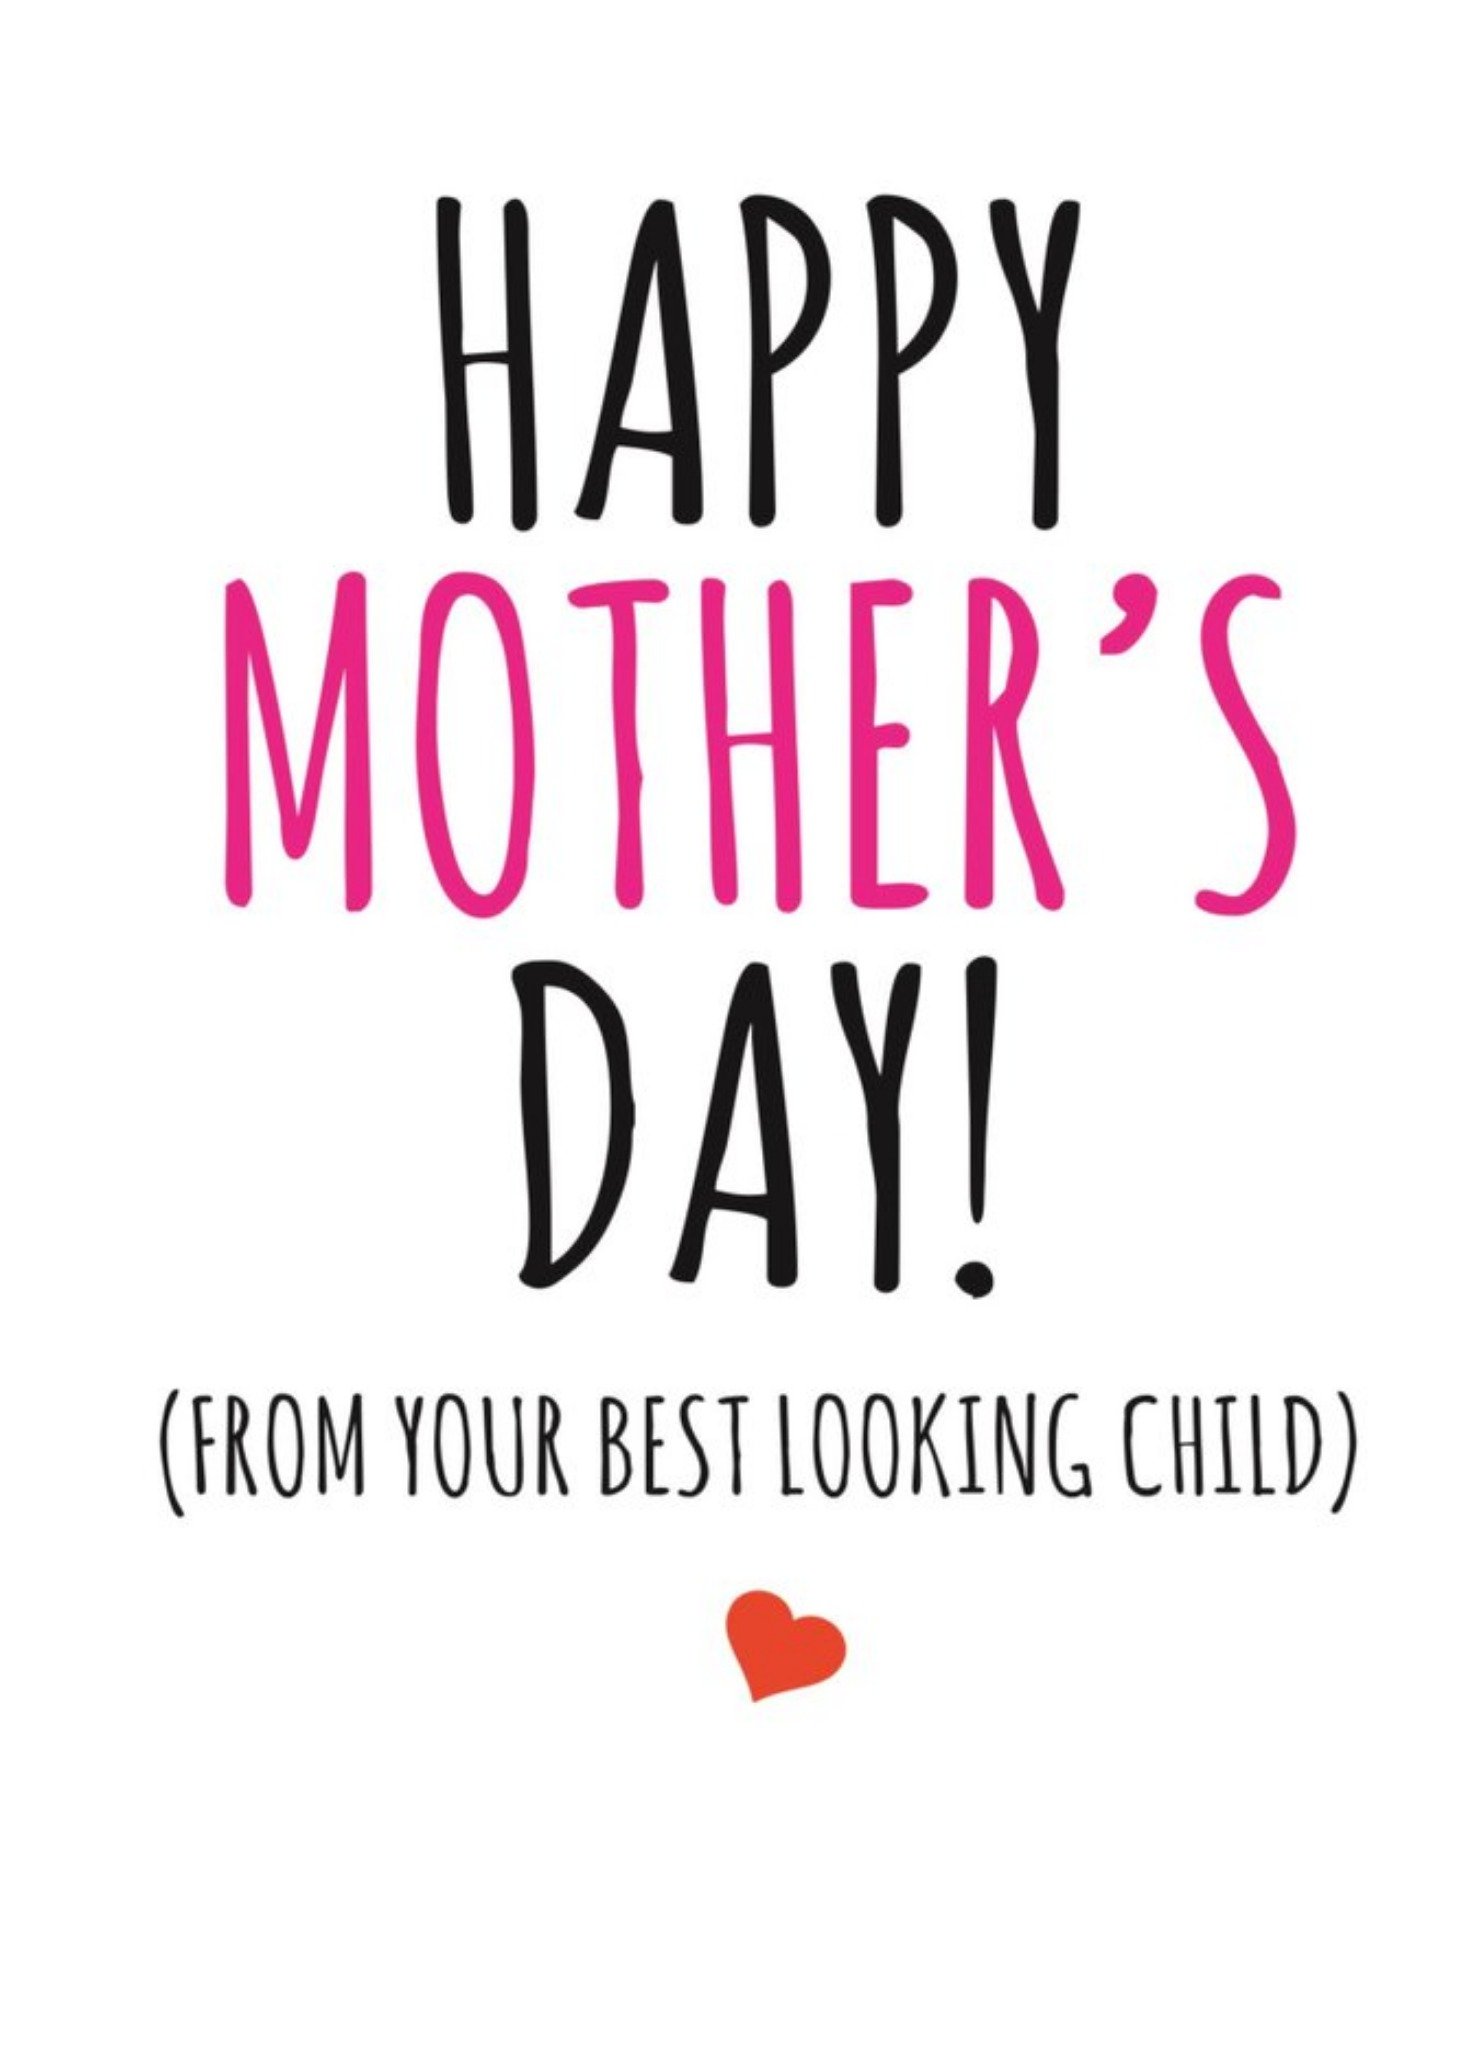 Banter King Typographical Happy Mothers Day From Your Best Looking Child Card Ecard